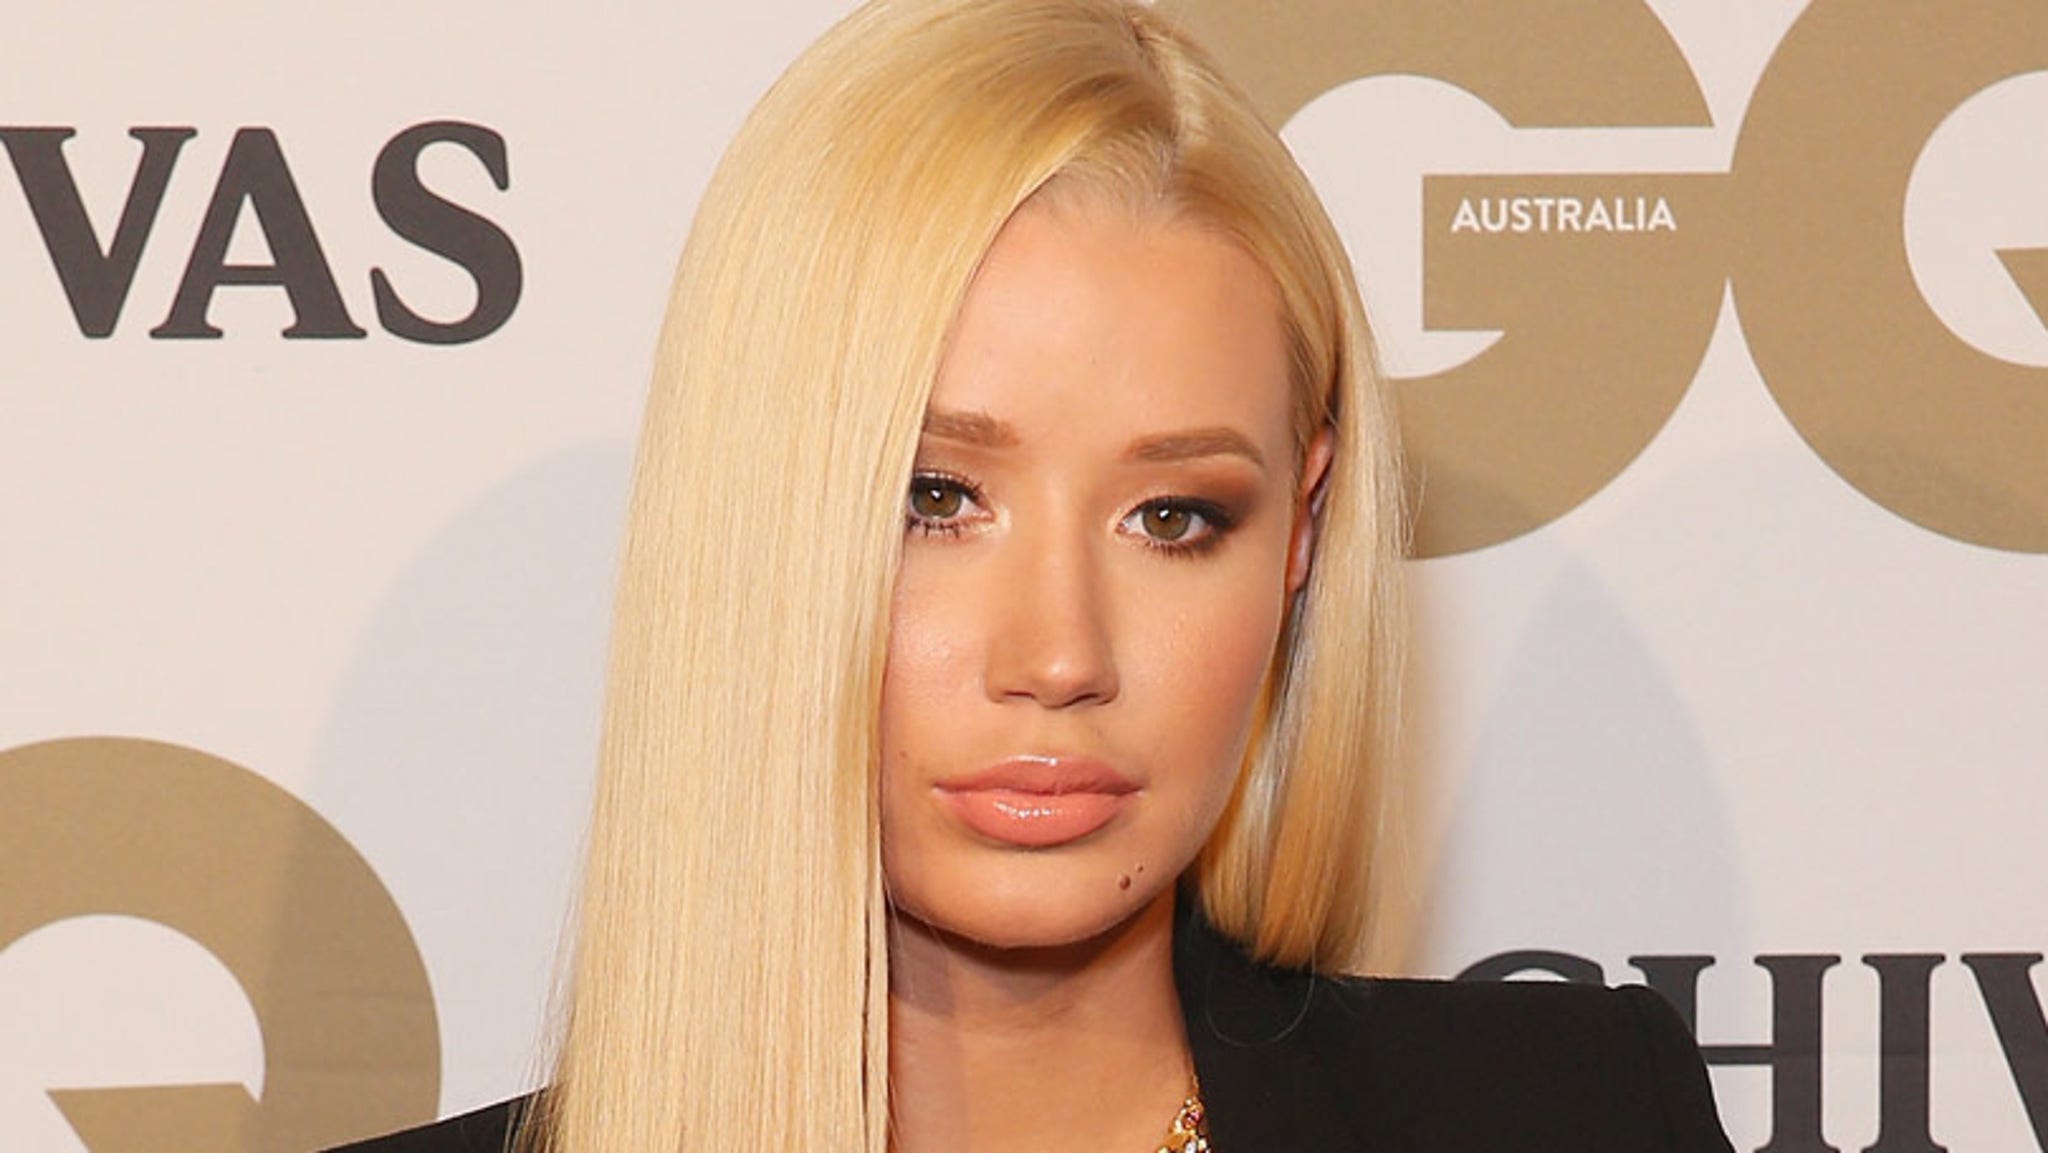 Iggy Azalea Says She Has The Vagina Of The Year And Its A Big Achievement